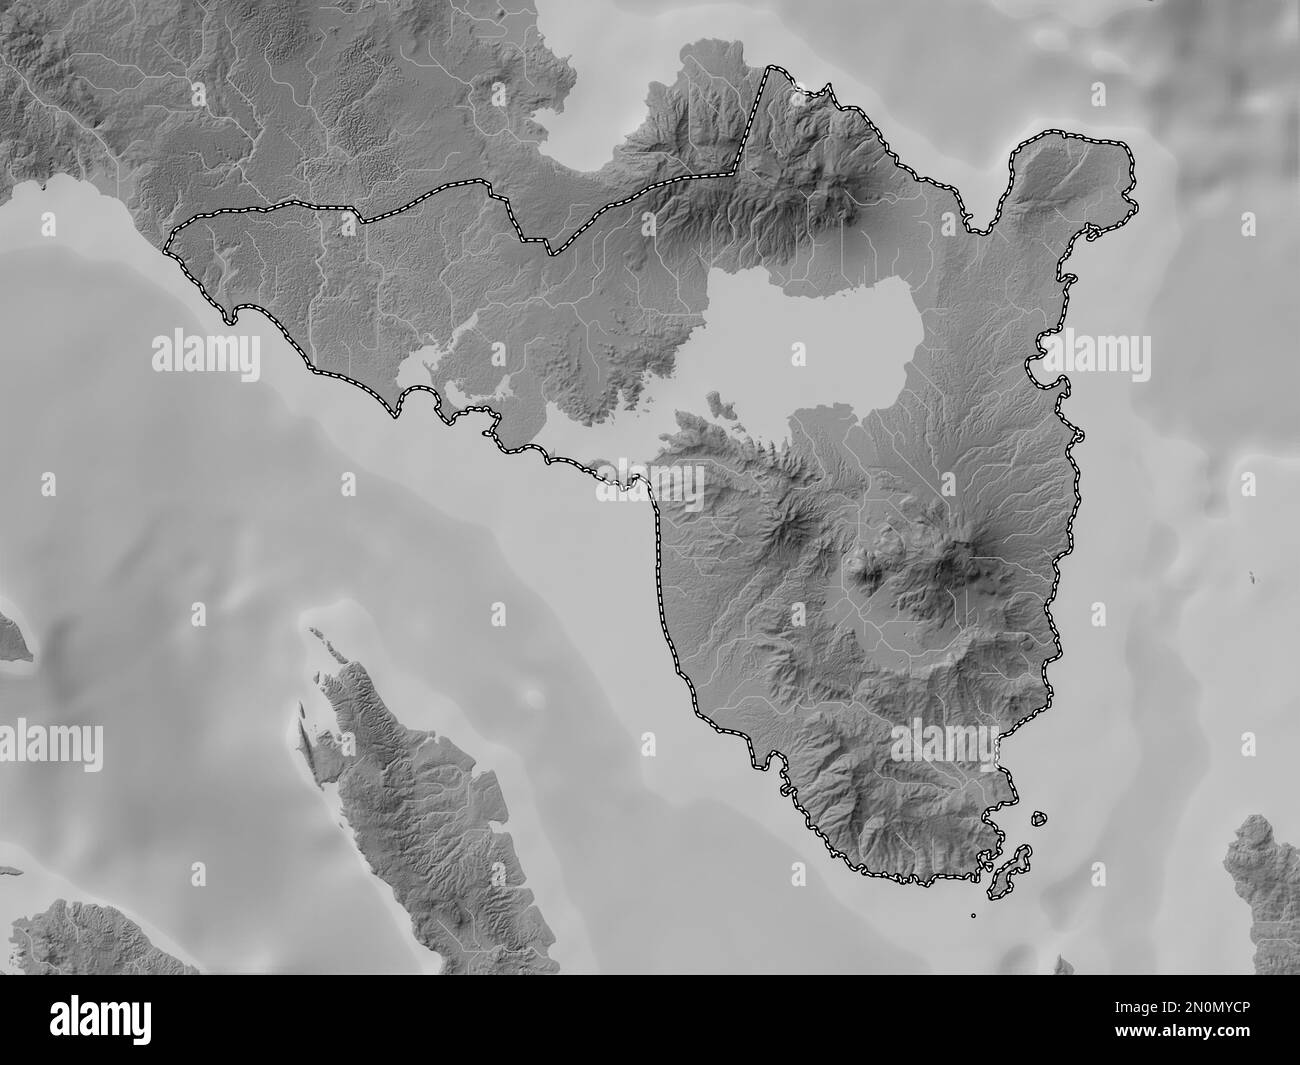 Sorsogon, province of Philippines. Grayscale elevation map with lakes and rivers Stock Photo